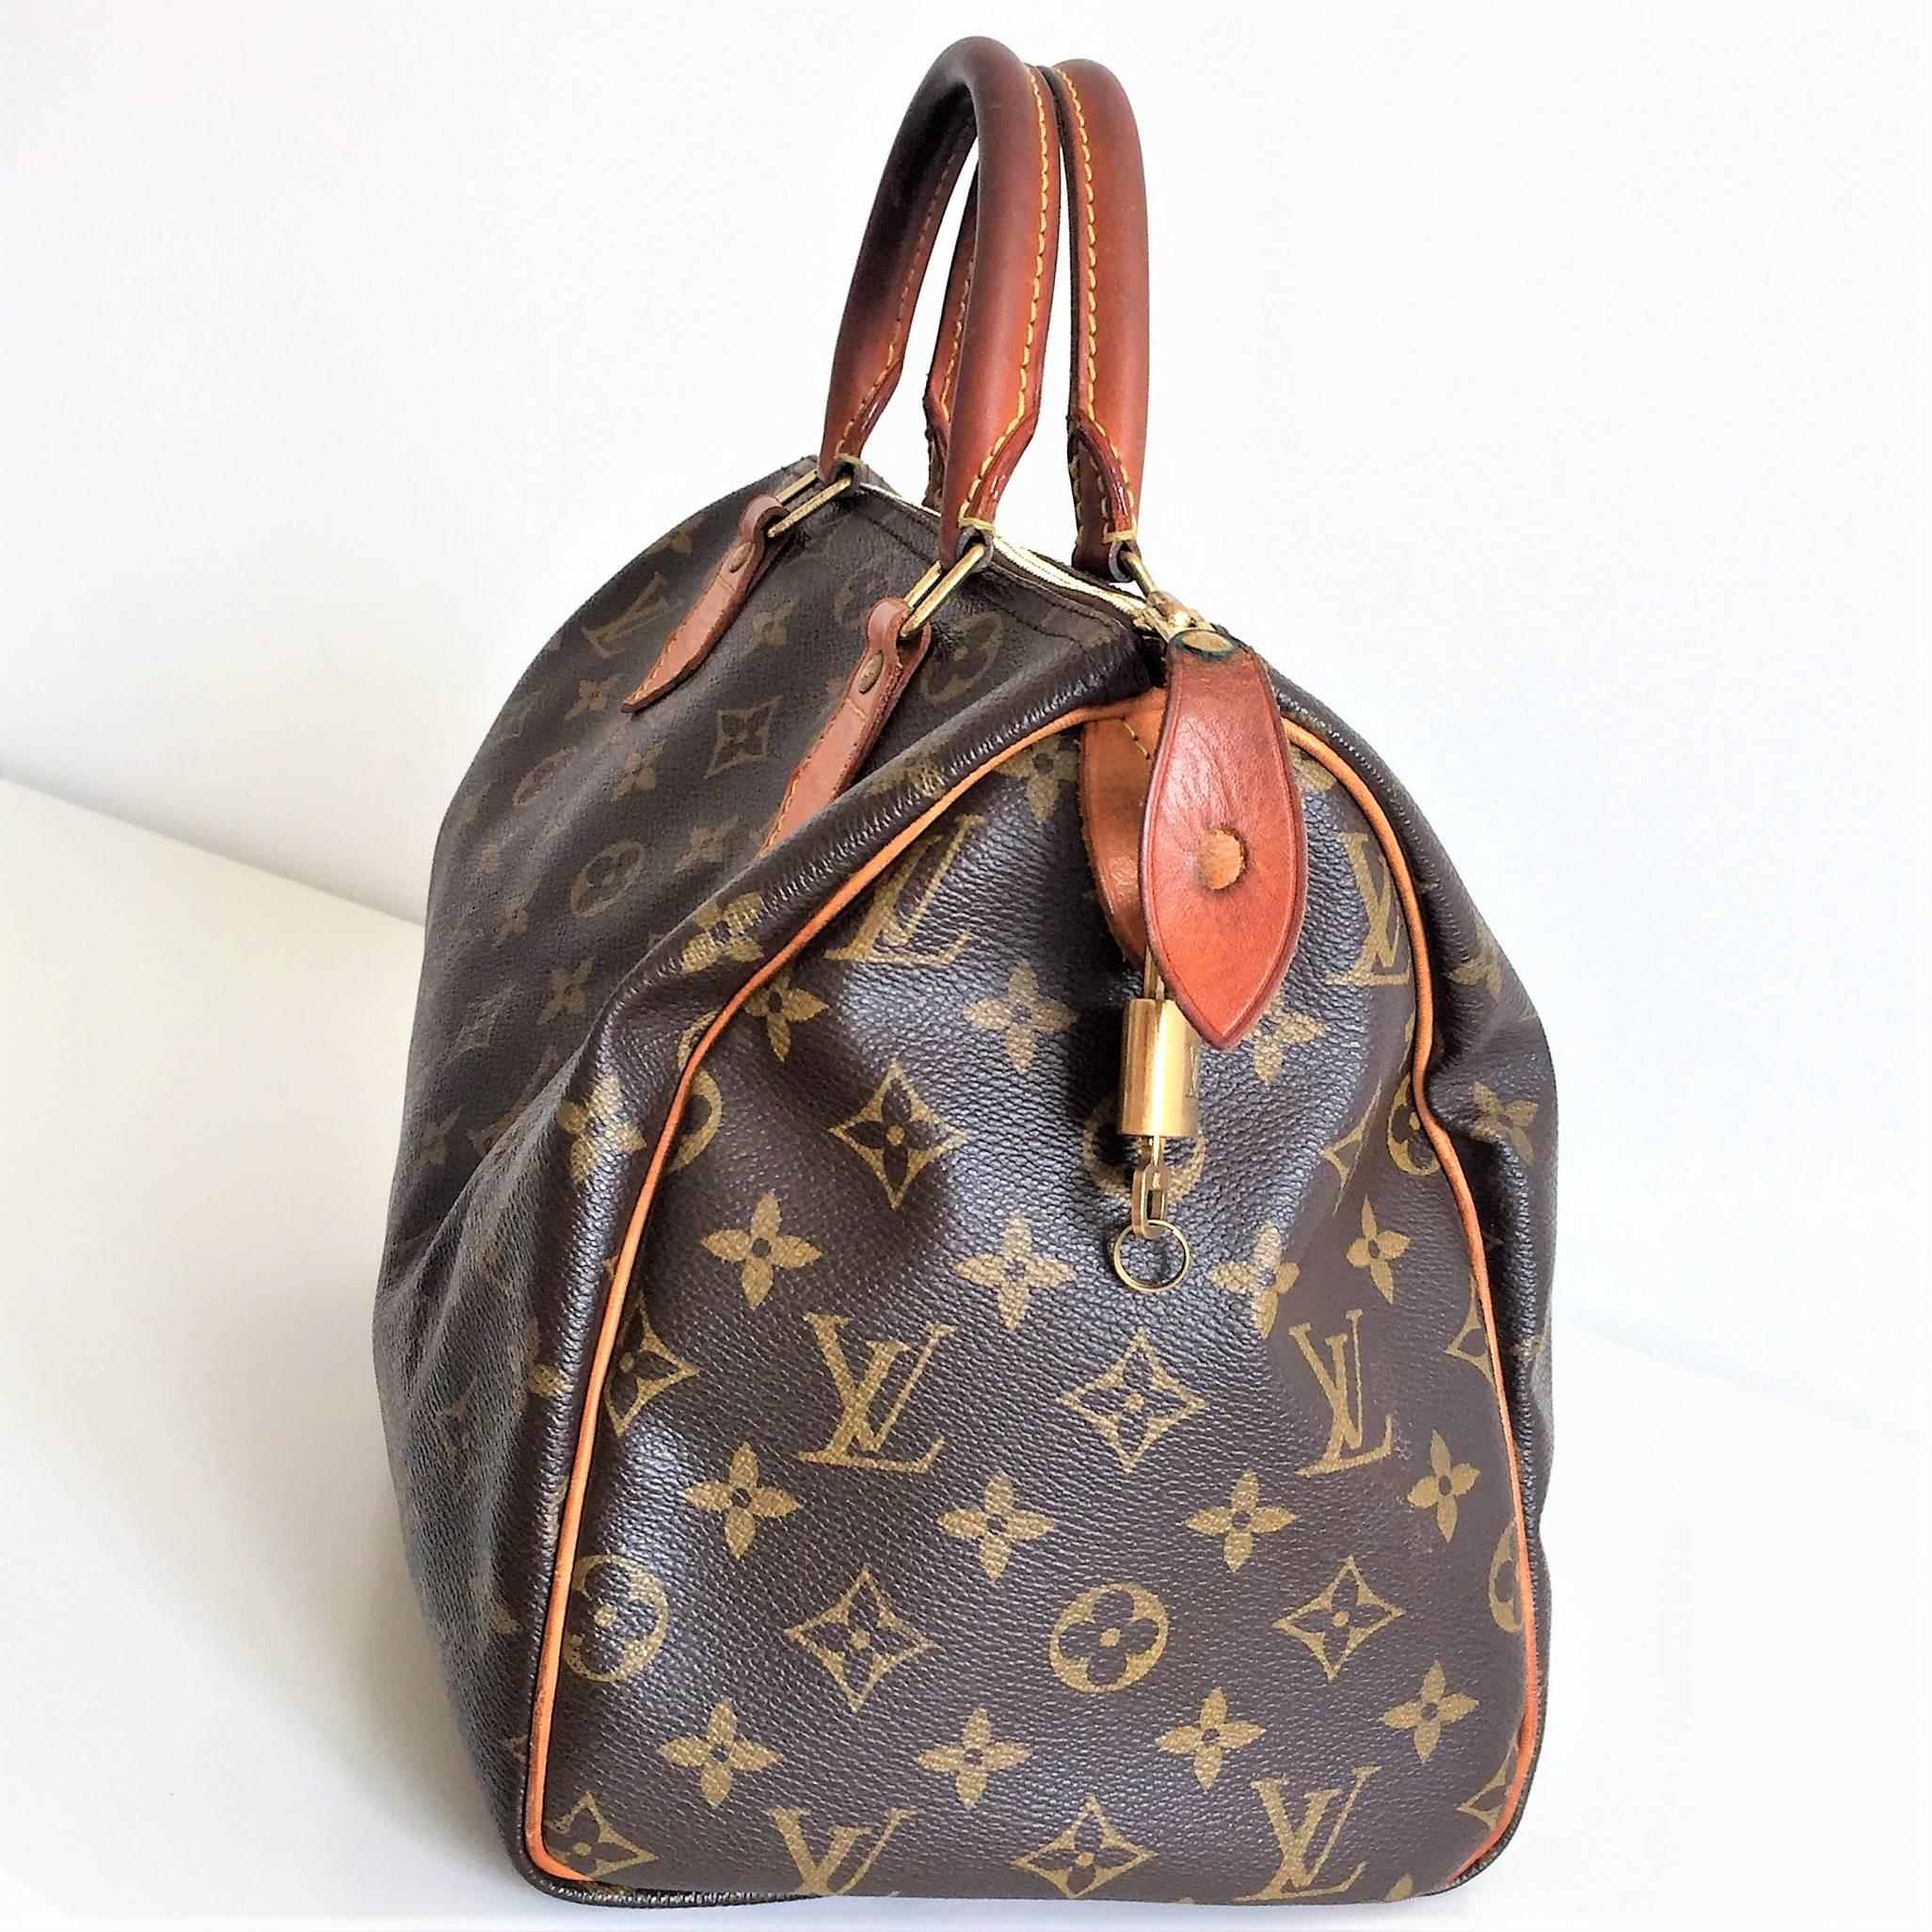 Louis Vuitton Speedy 30 Monogram Handbag Purse. Pre Owned in Good Condition, please see all the pics. Size in inch: W11.81 x H8.66 X D6.88. Size in cm: W30 x H22 x D17.5. 
